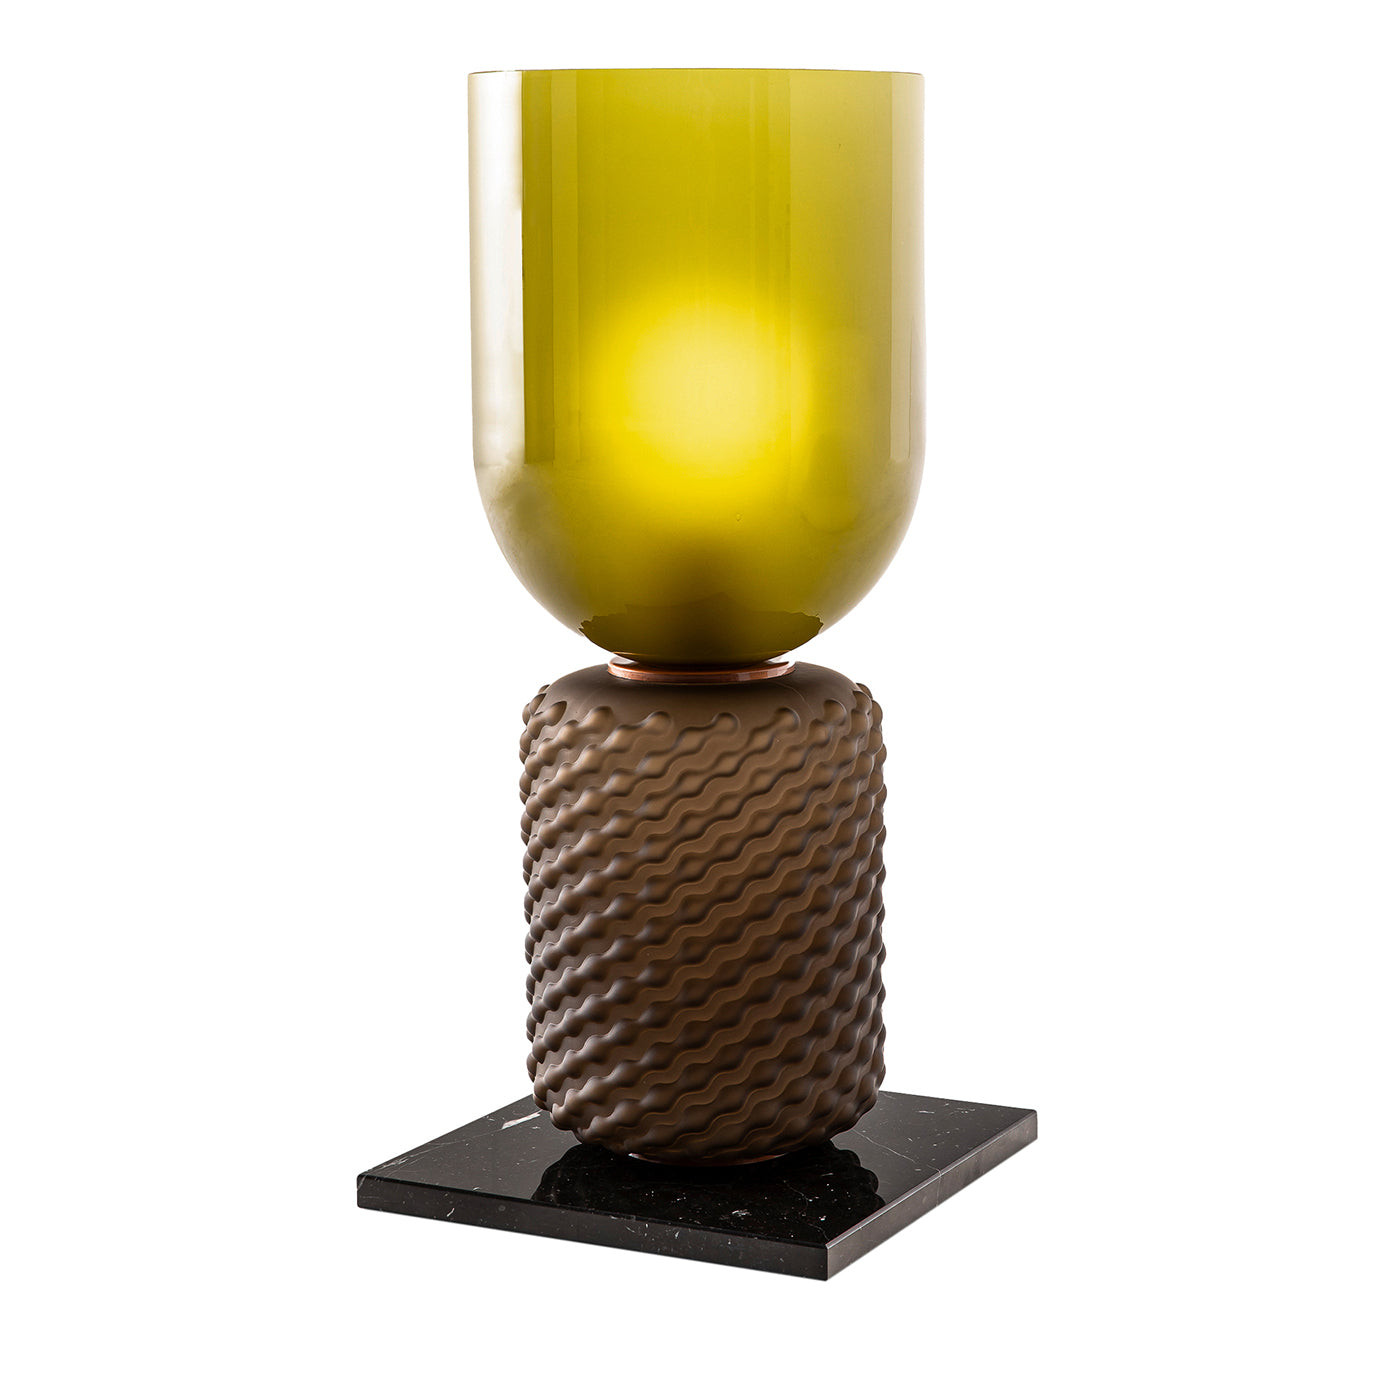 Ficupala by Cassina - Table lamp #1 - Alternative view 1